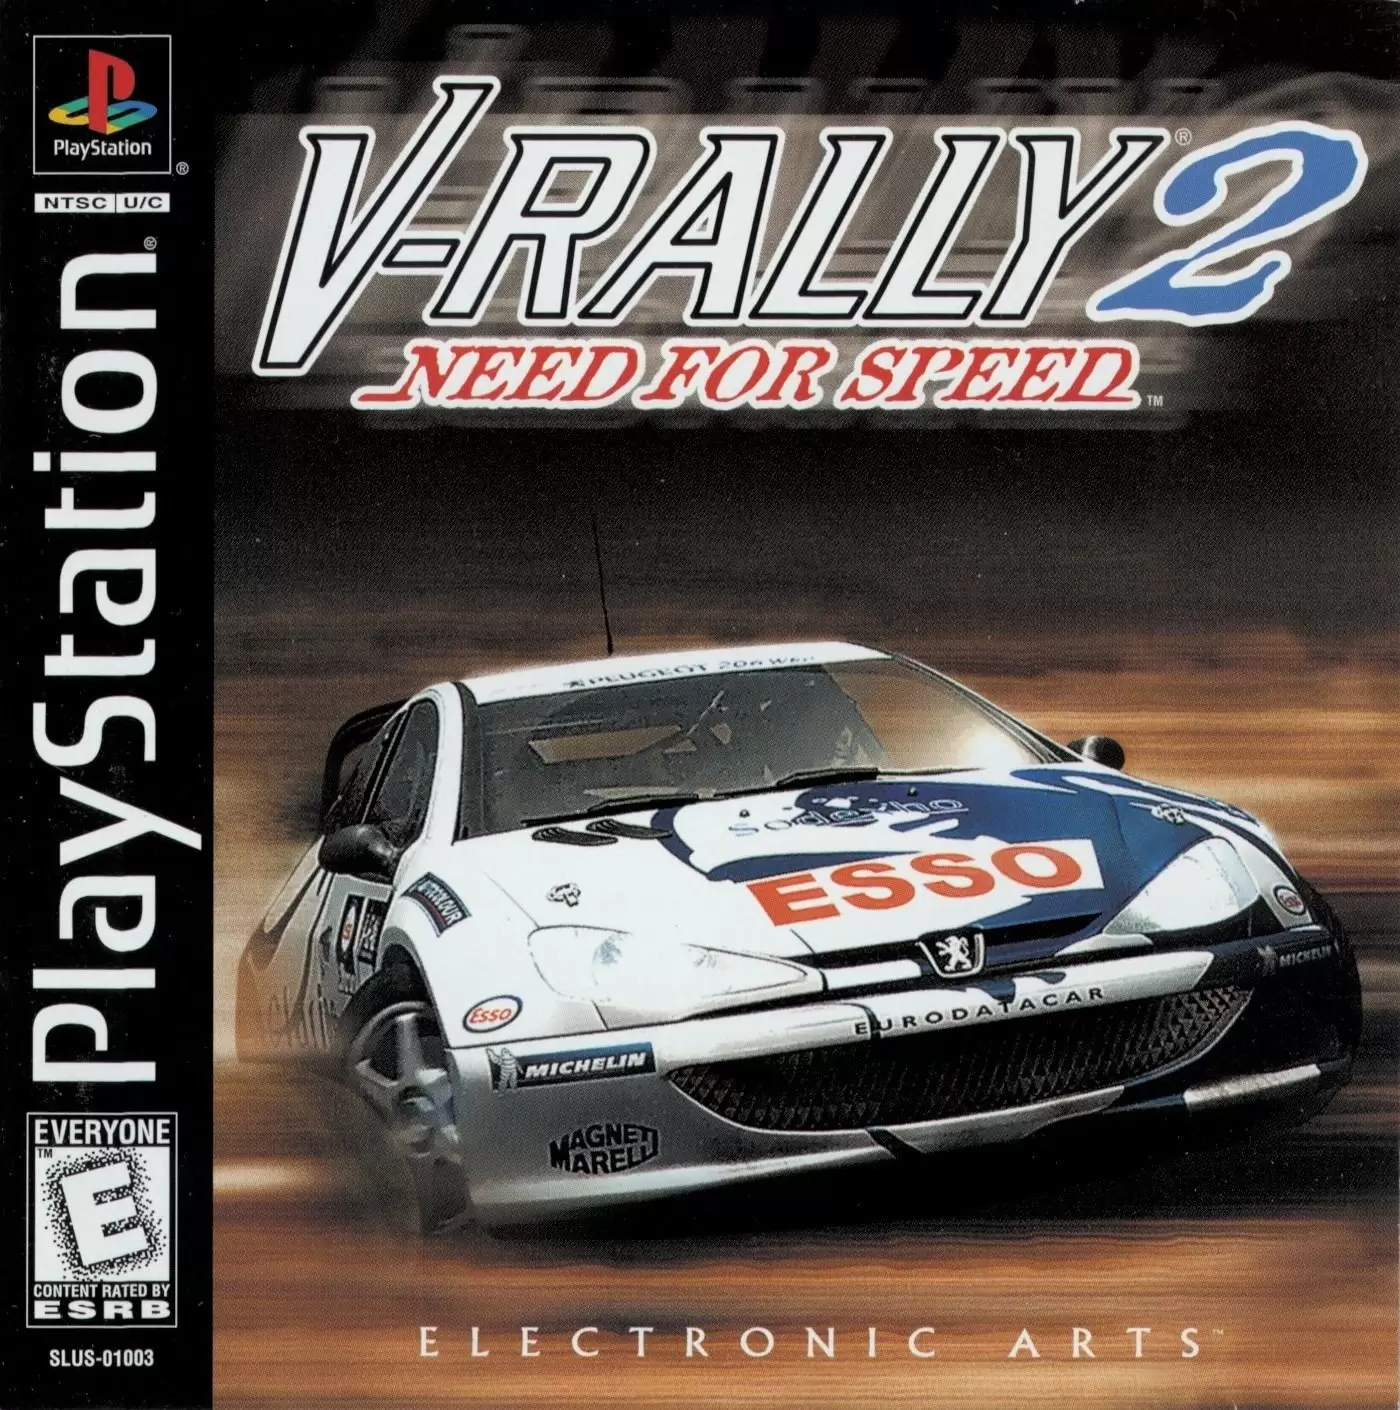 Playstation games - Need for Speed: V-Rally 2